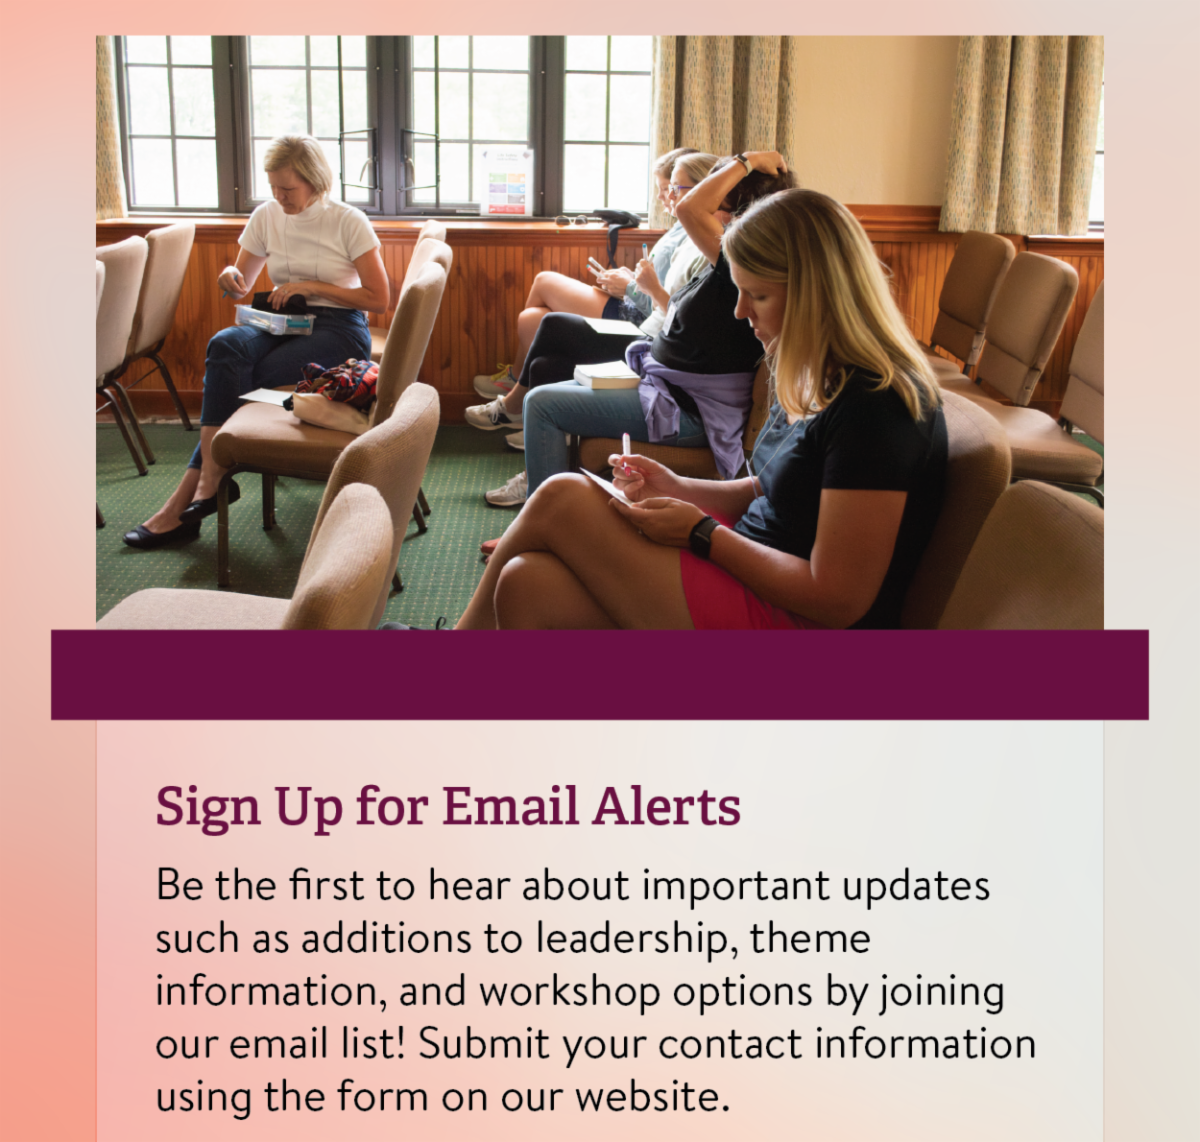 Sign Up for Email Alerts - Be the first to hear about important updates such as additions to leadership, theme information, and workshop options by joining our email list! Submit your contact information using the form on our website.